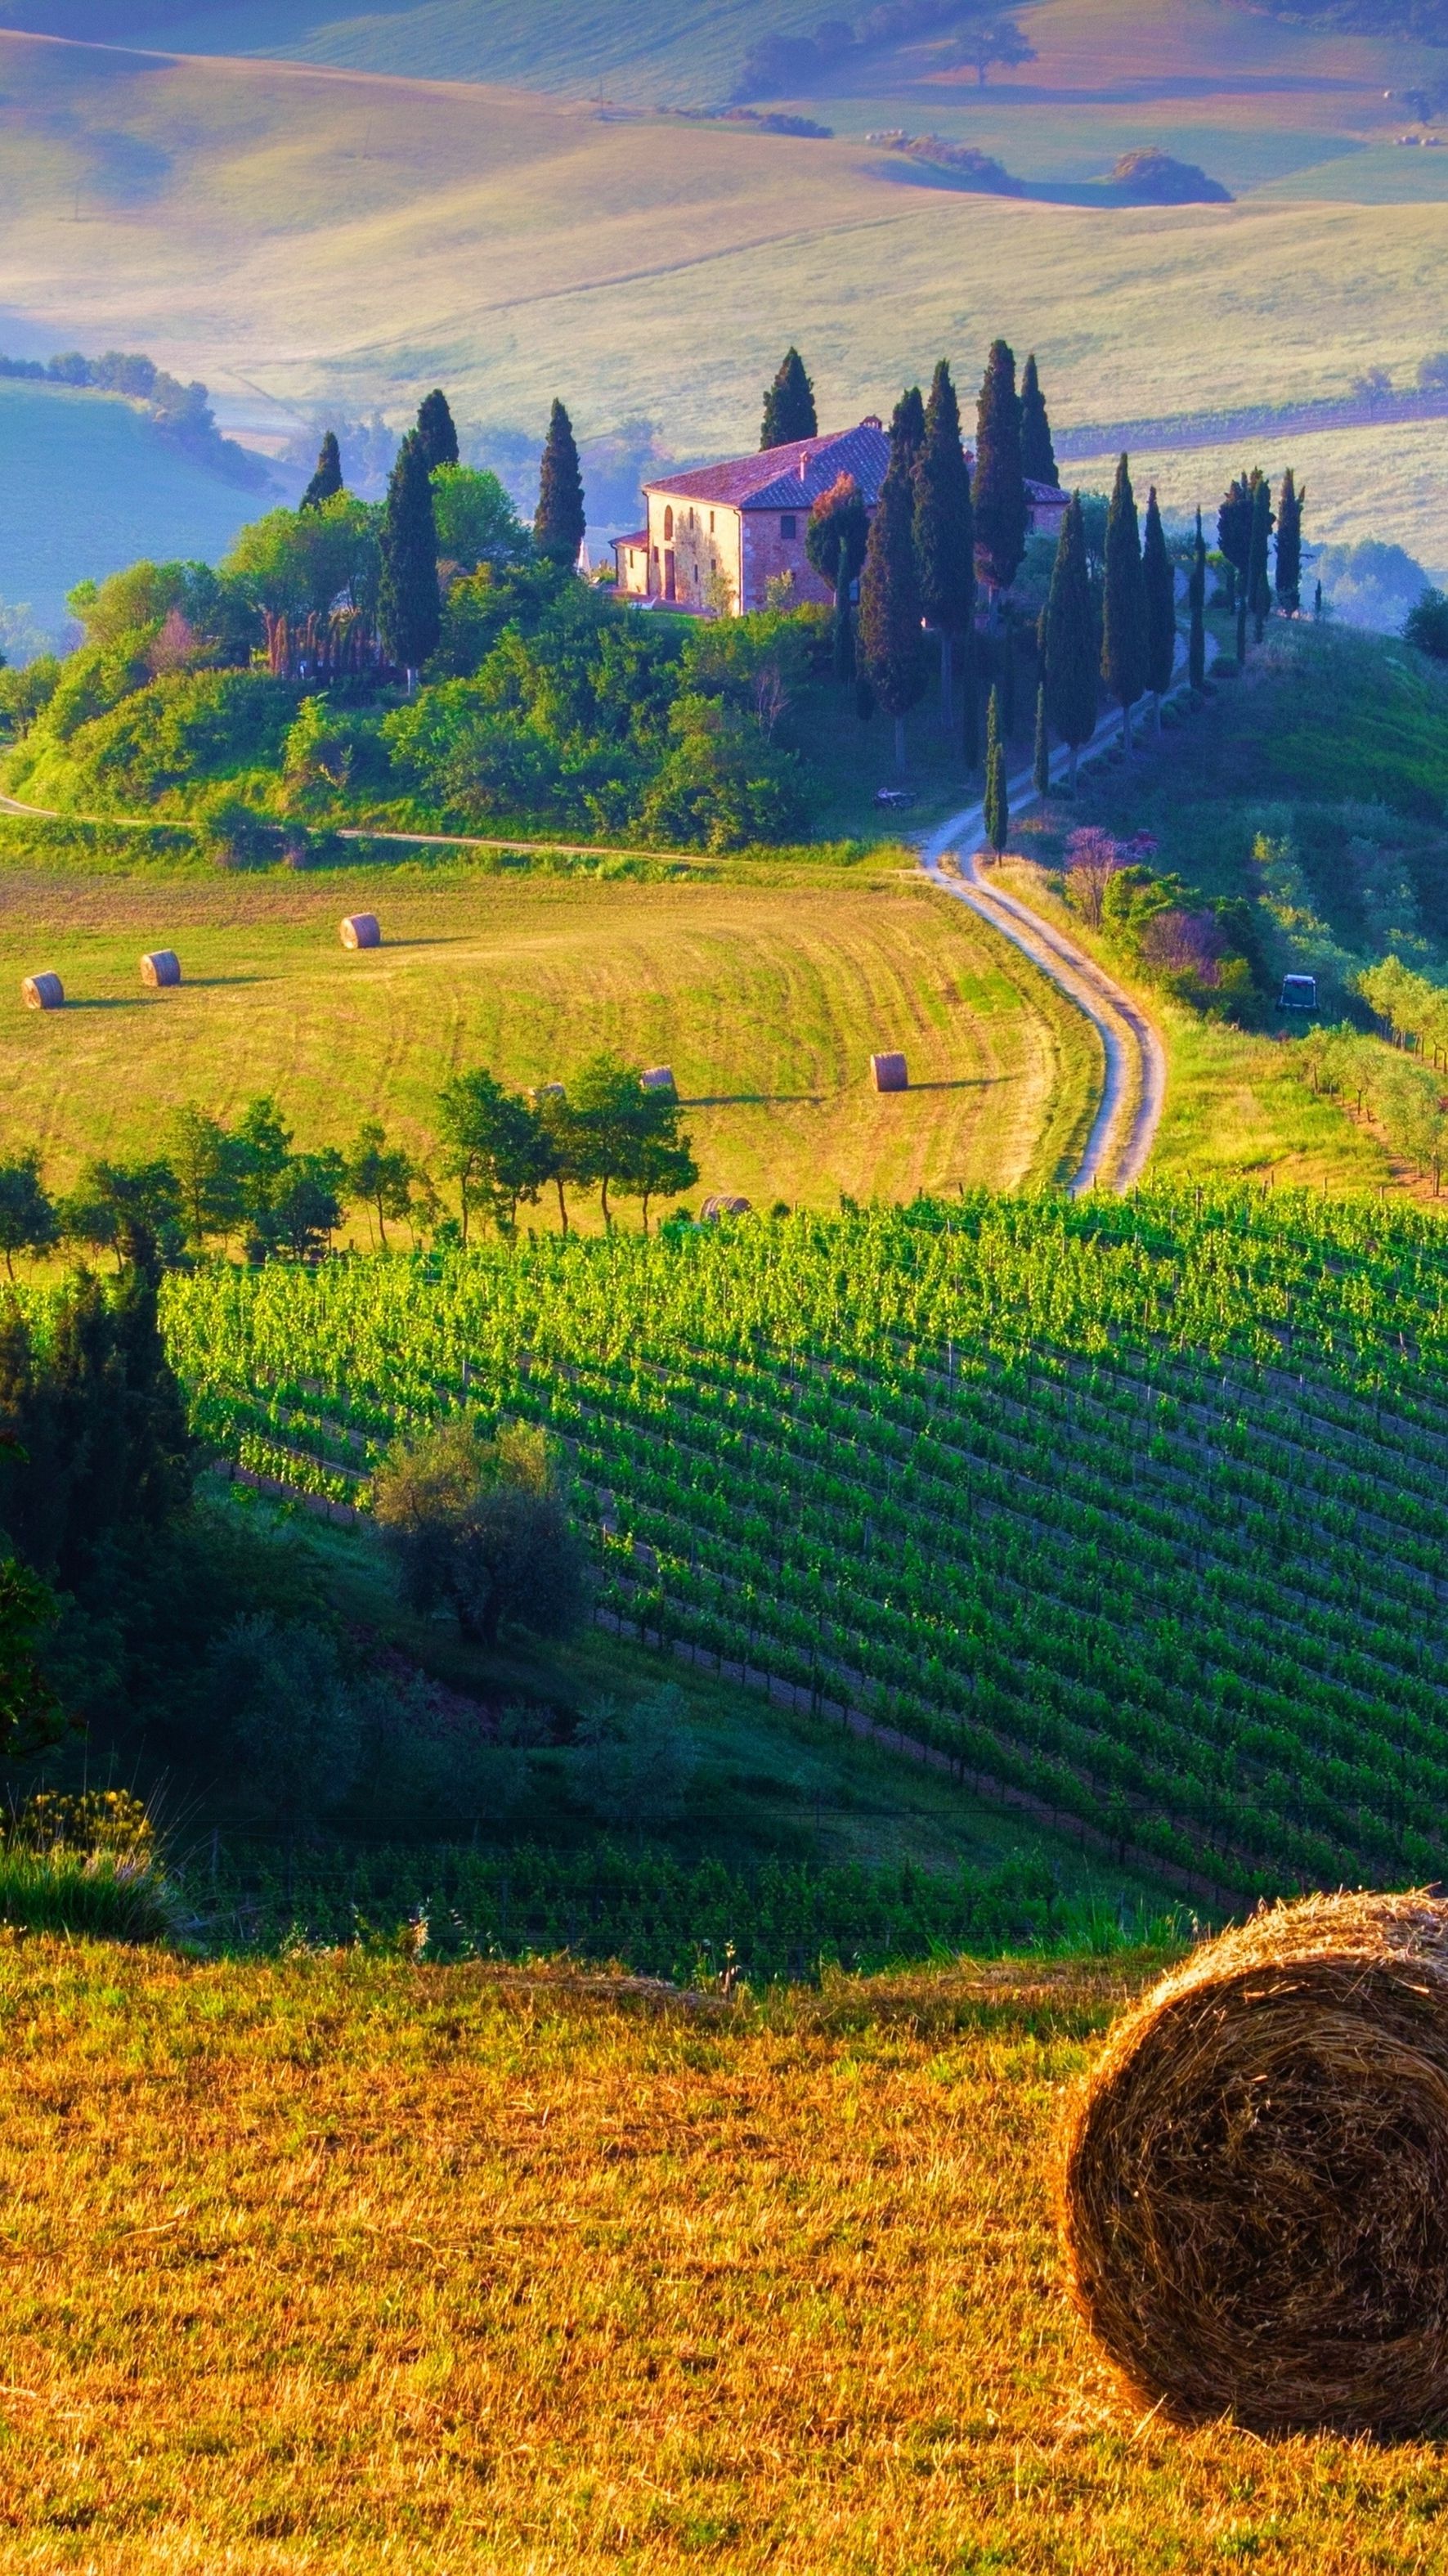 Tuscany Italy Landscape IPhone Wallpaper. Time For Myself In 2019